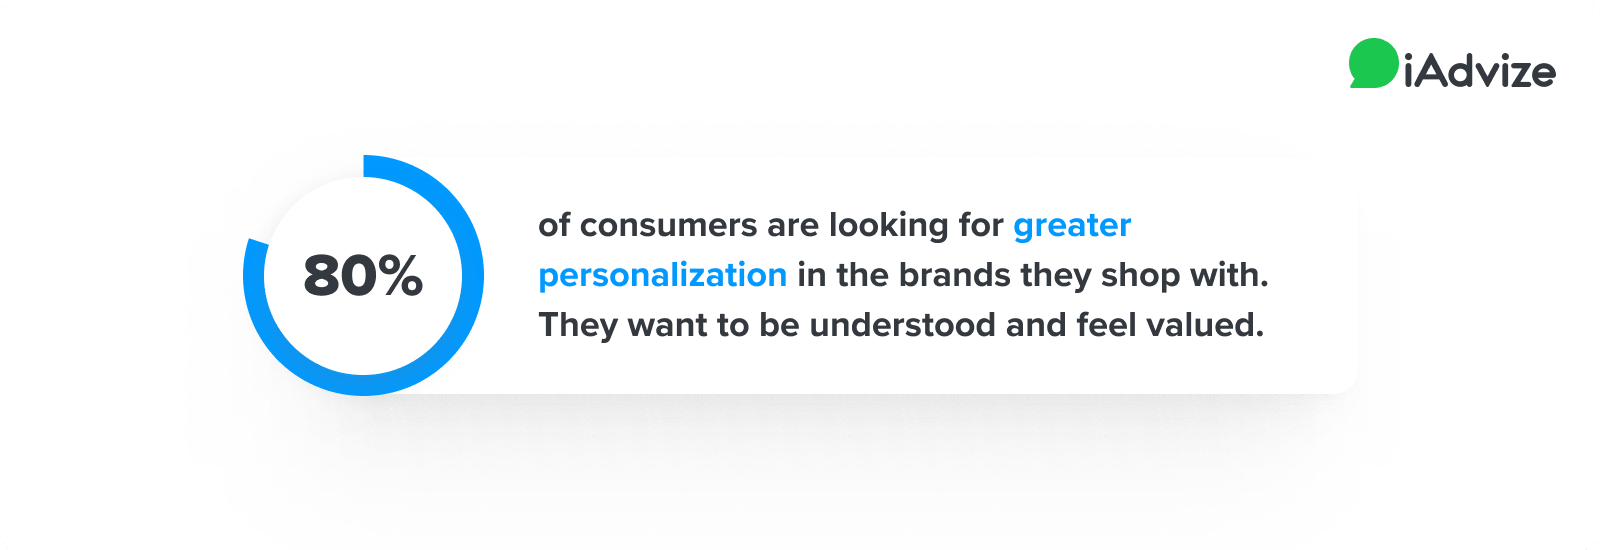 80% say they'll stay loyal to brands that truly know them and to understand their needs